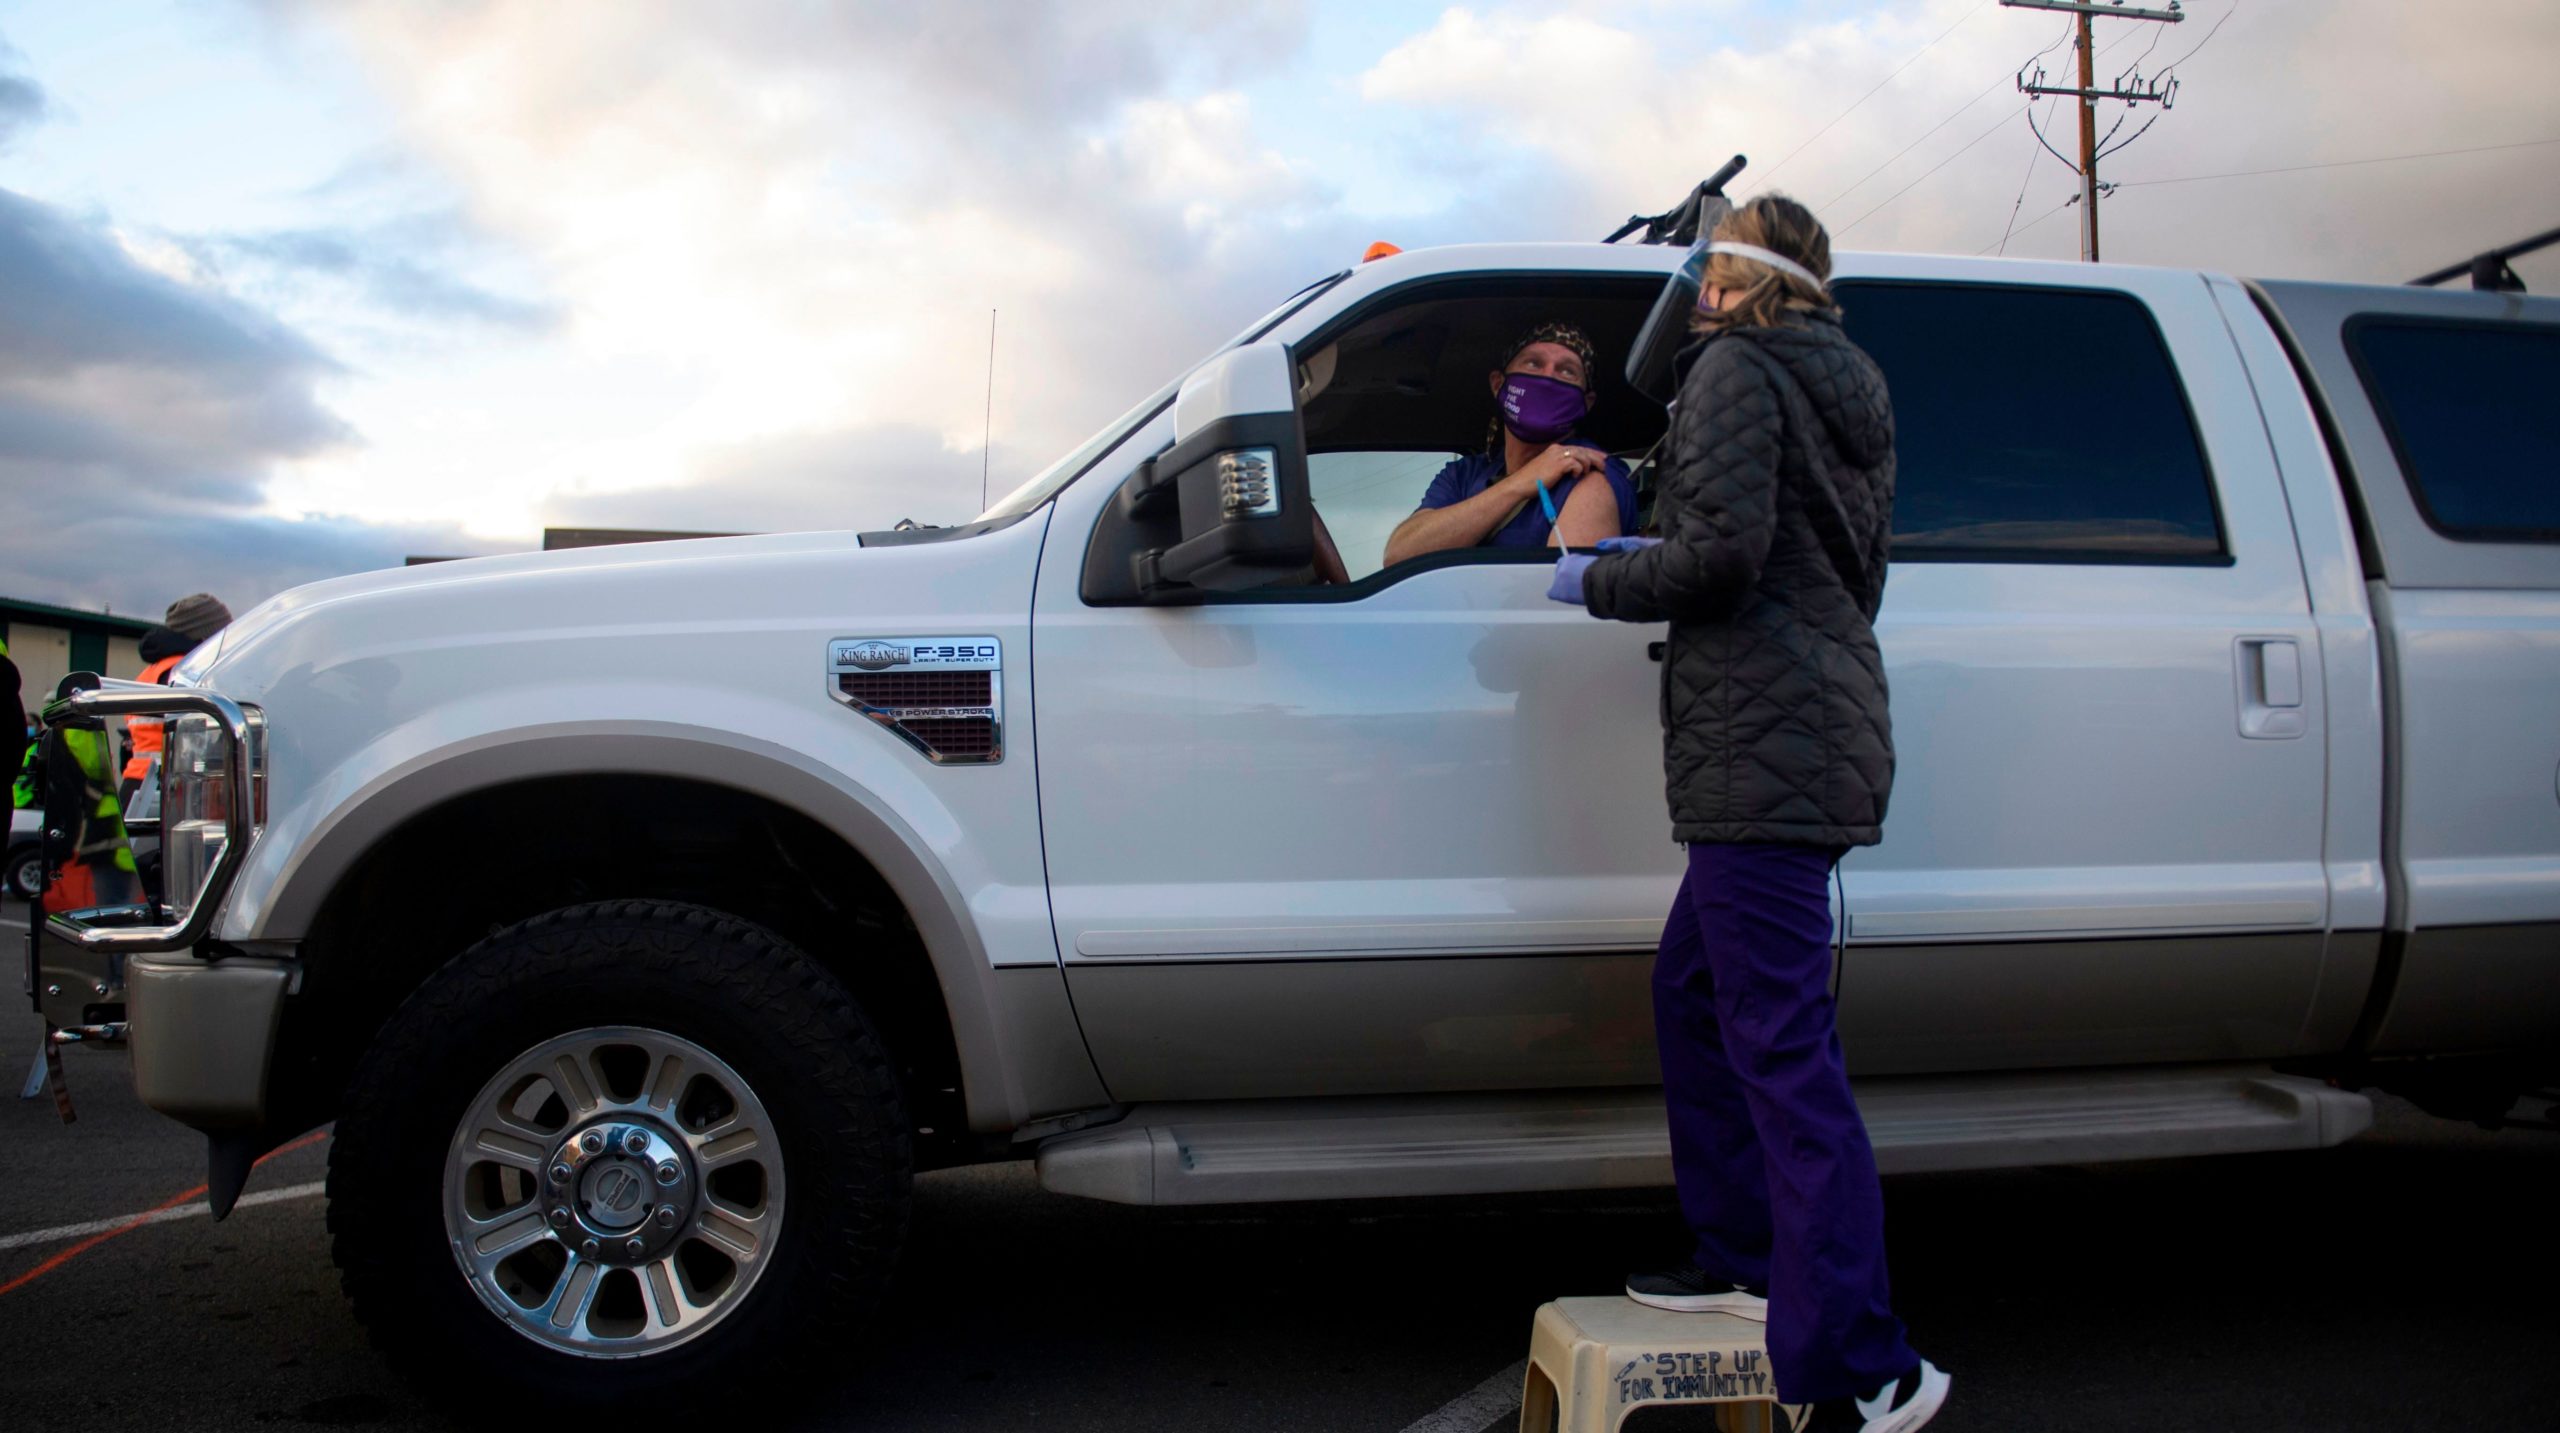 Dr. Bret Frey, an emergency medicine physician, talks with a nurse from inside a truck after receiving a first dose of the Pfizer/BioNTech covid-19 vaccine under an emergency use authorization at a drive-up vaccination site from Renown Health on December 17, 2020 in Reno, Nevada. (Photo: Patrick T. Fallon / AFP, Getty Images)